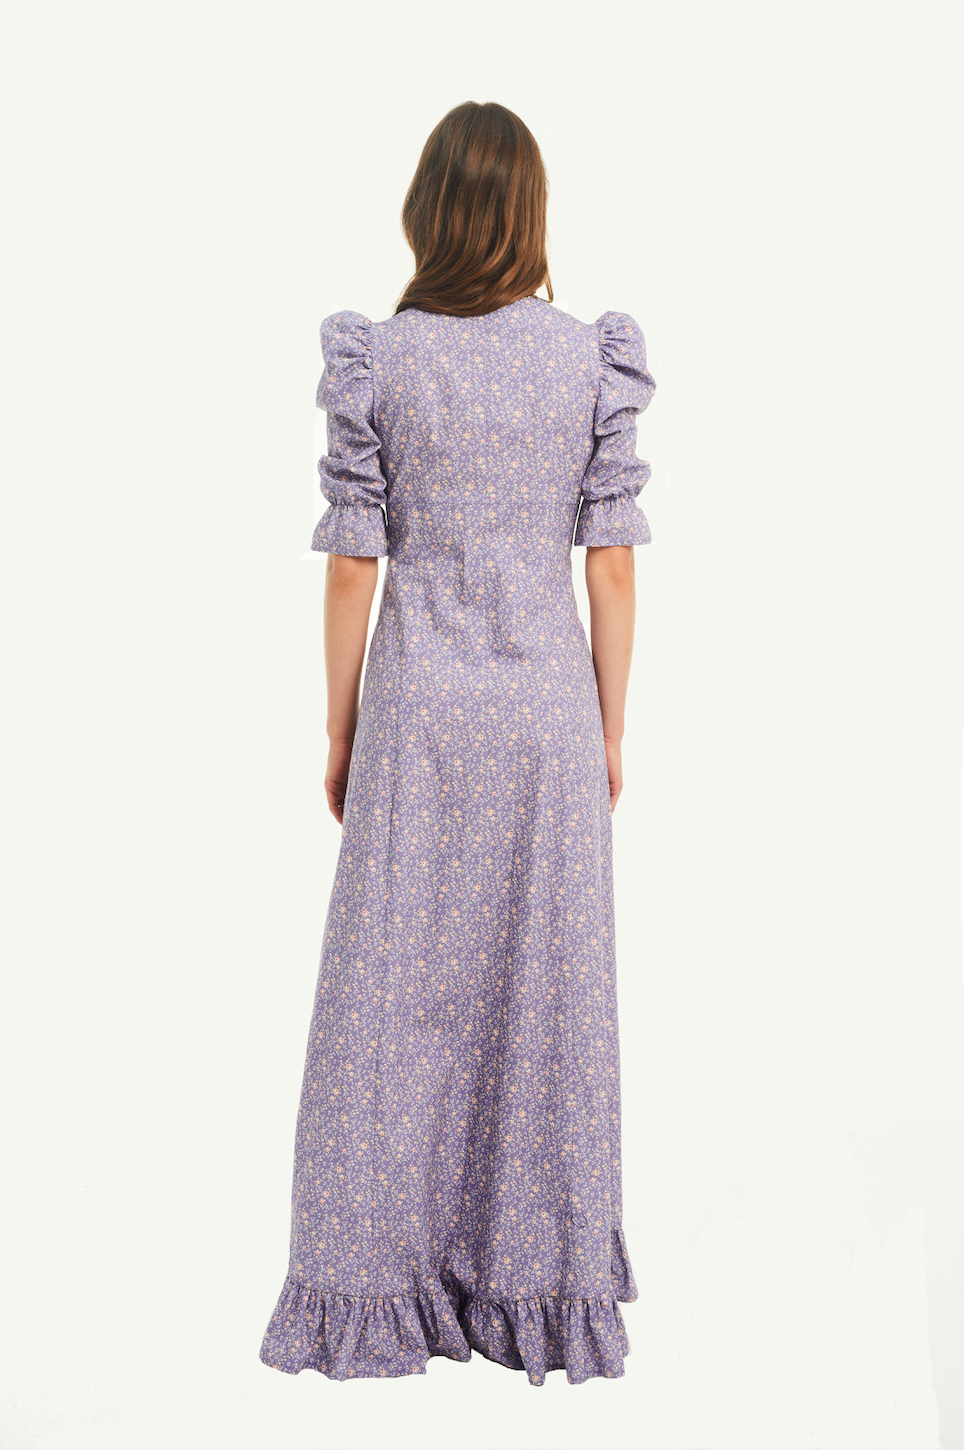 GIGLIO - long Kew patterned cotton dress